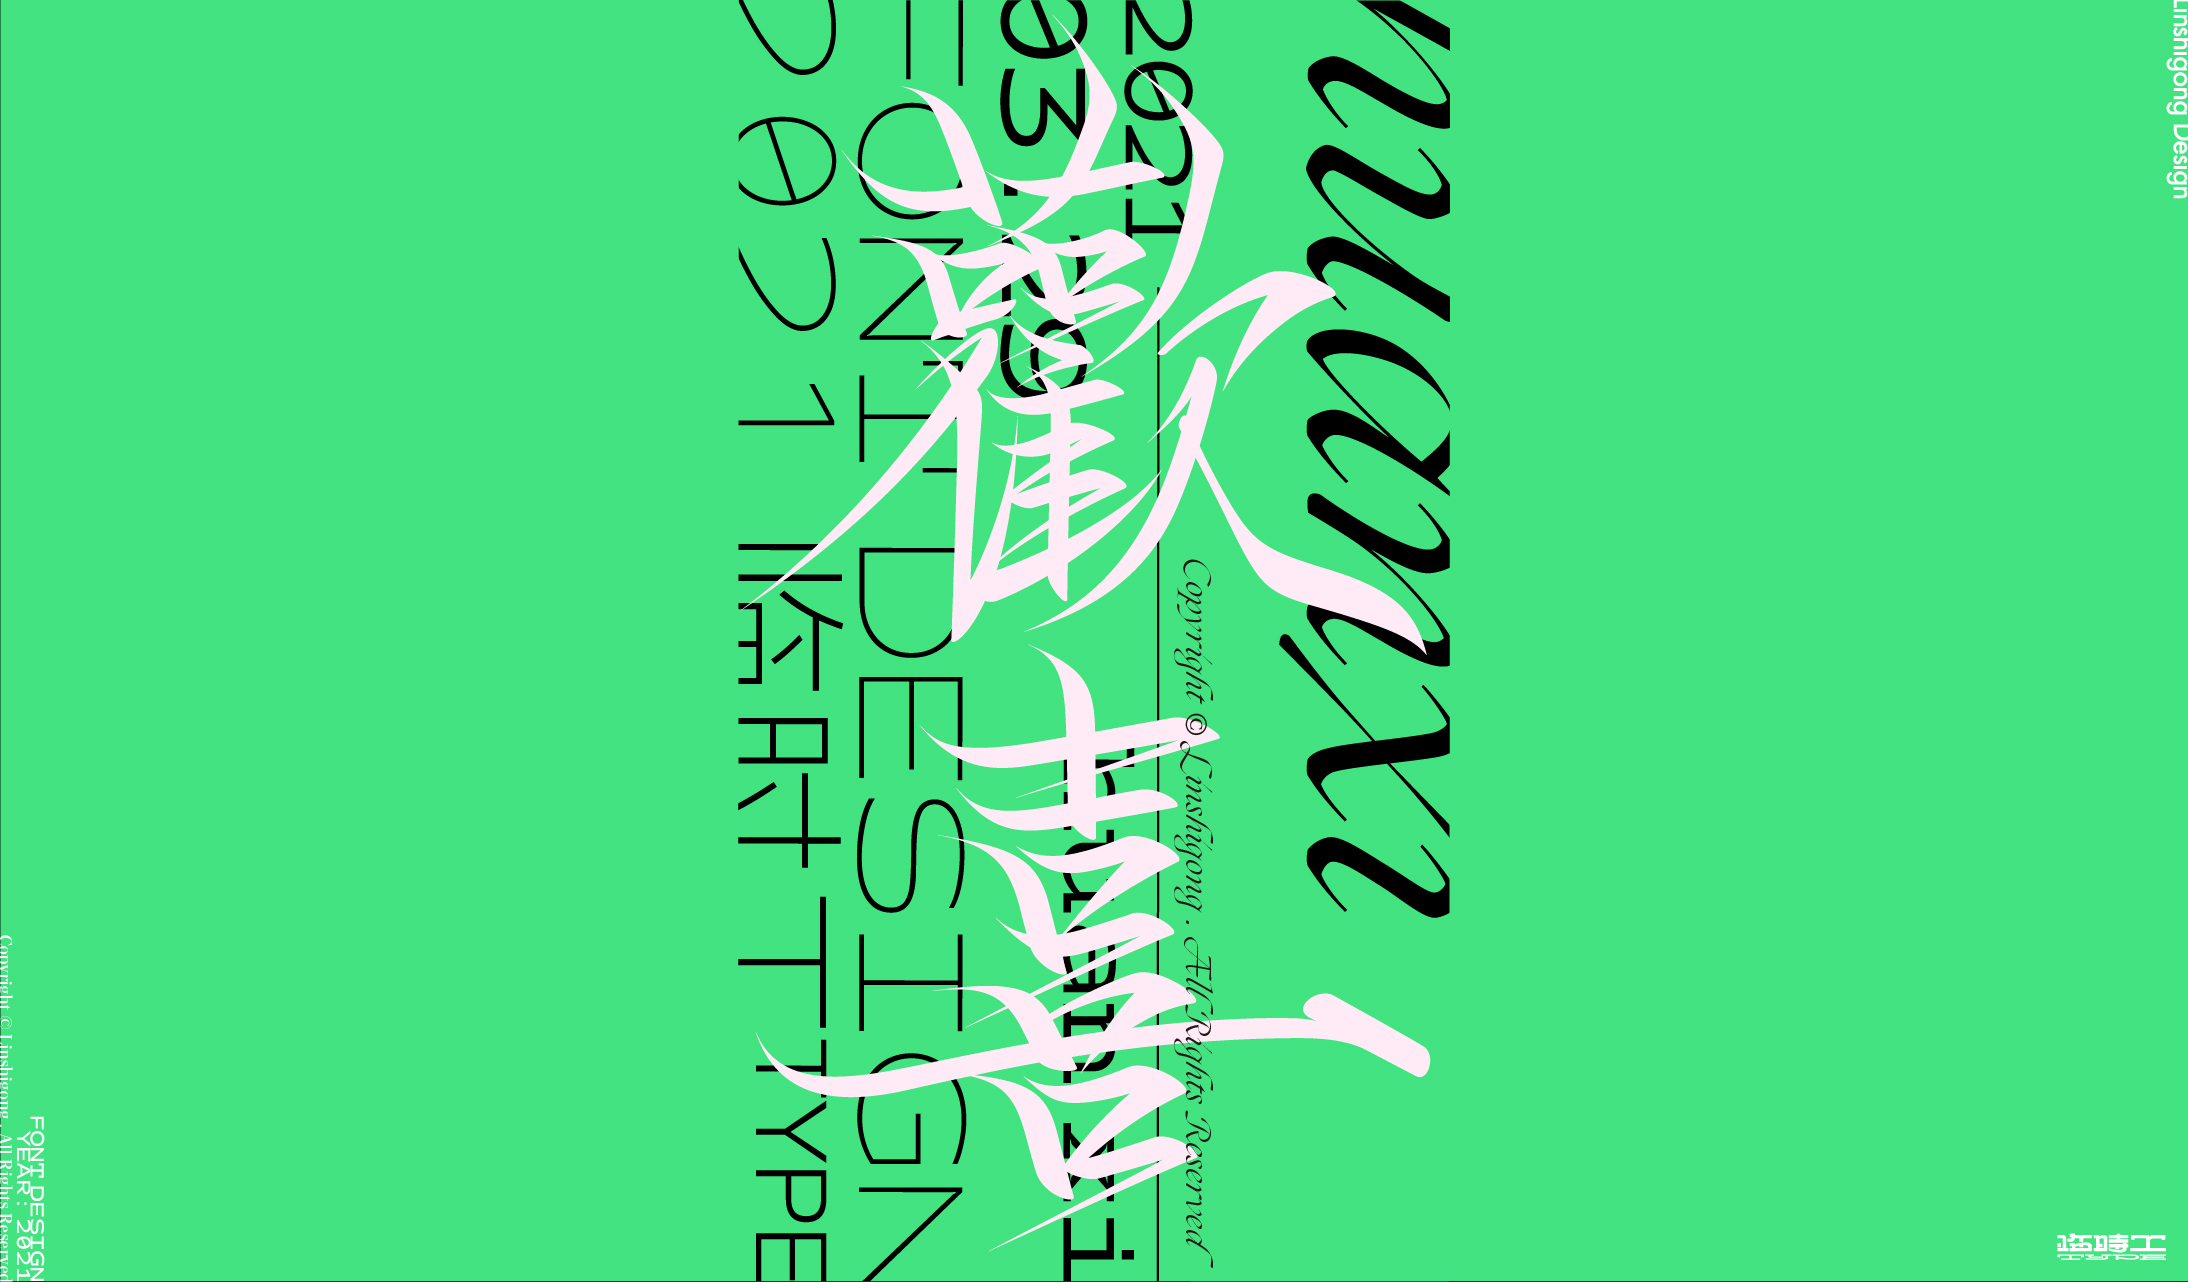 29P The latest collection of Chinese fonts #116